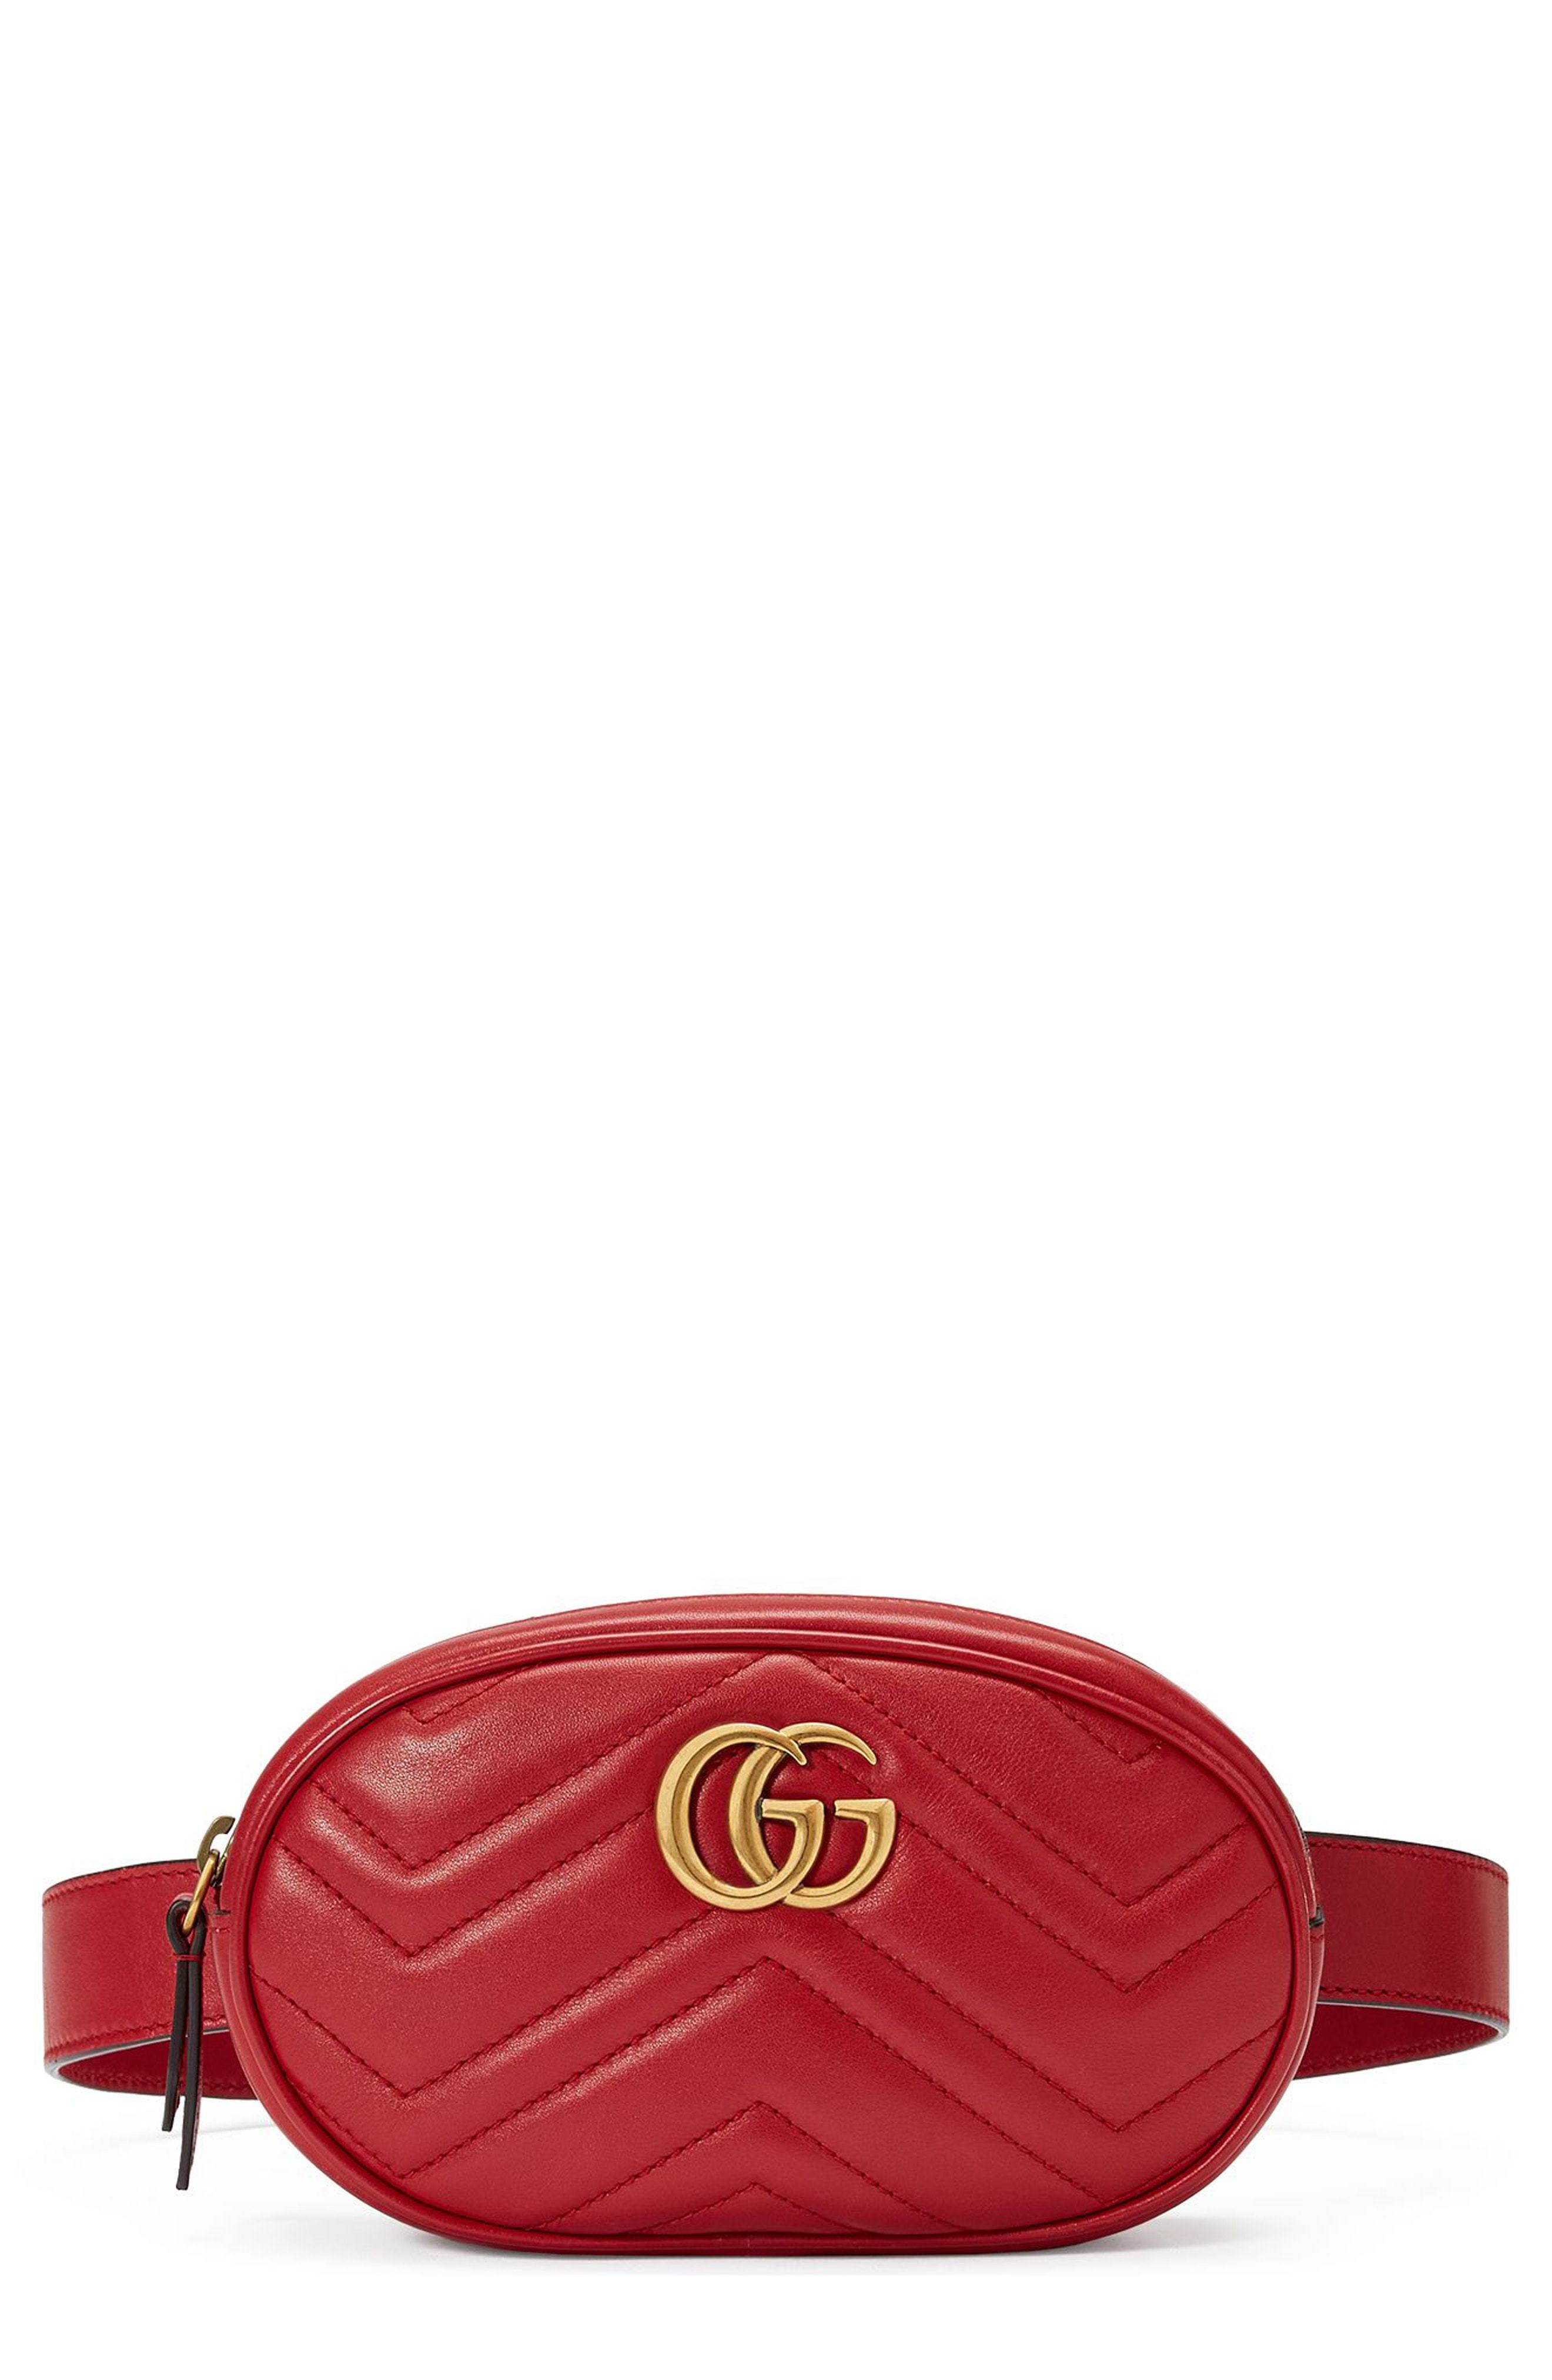 red gucci fanny pack, OFF 79%,www 